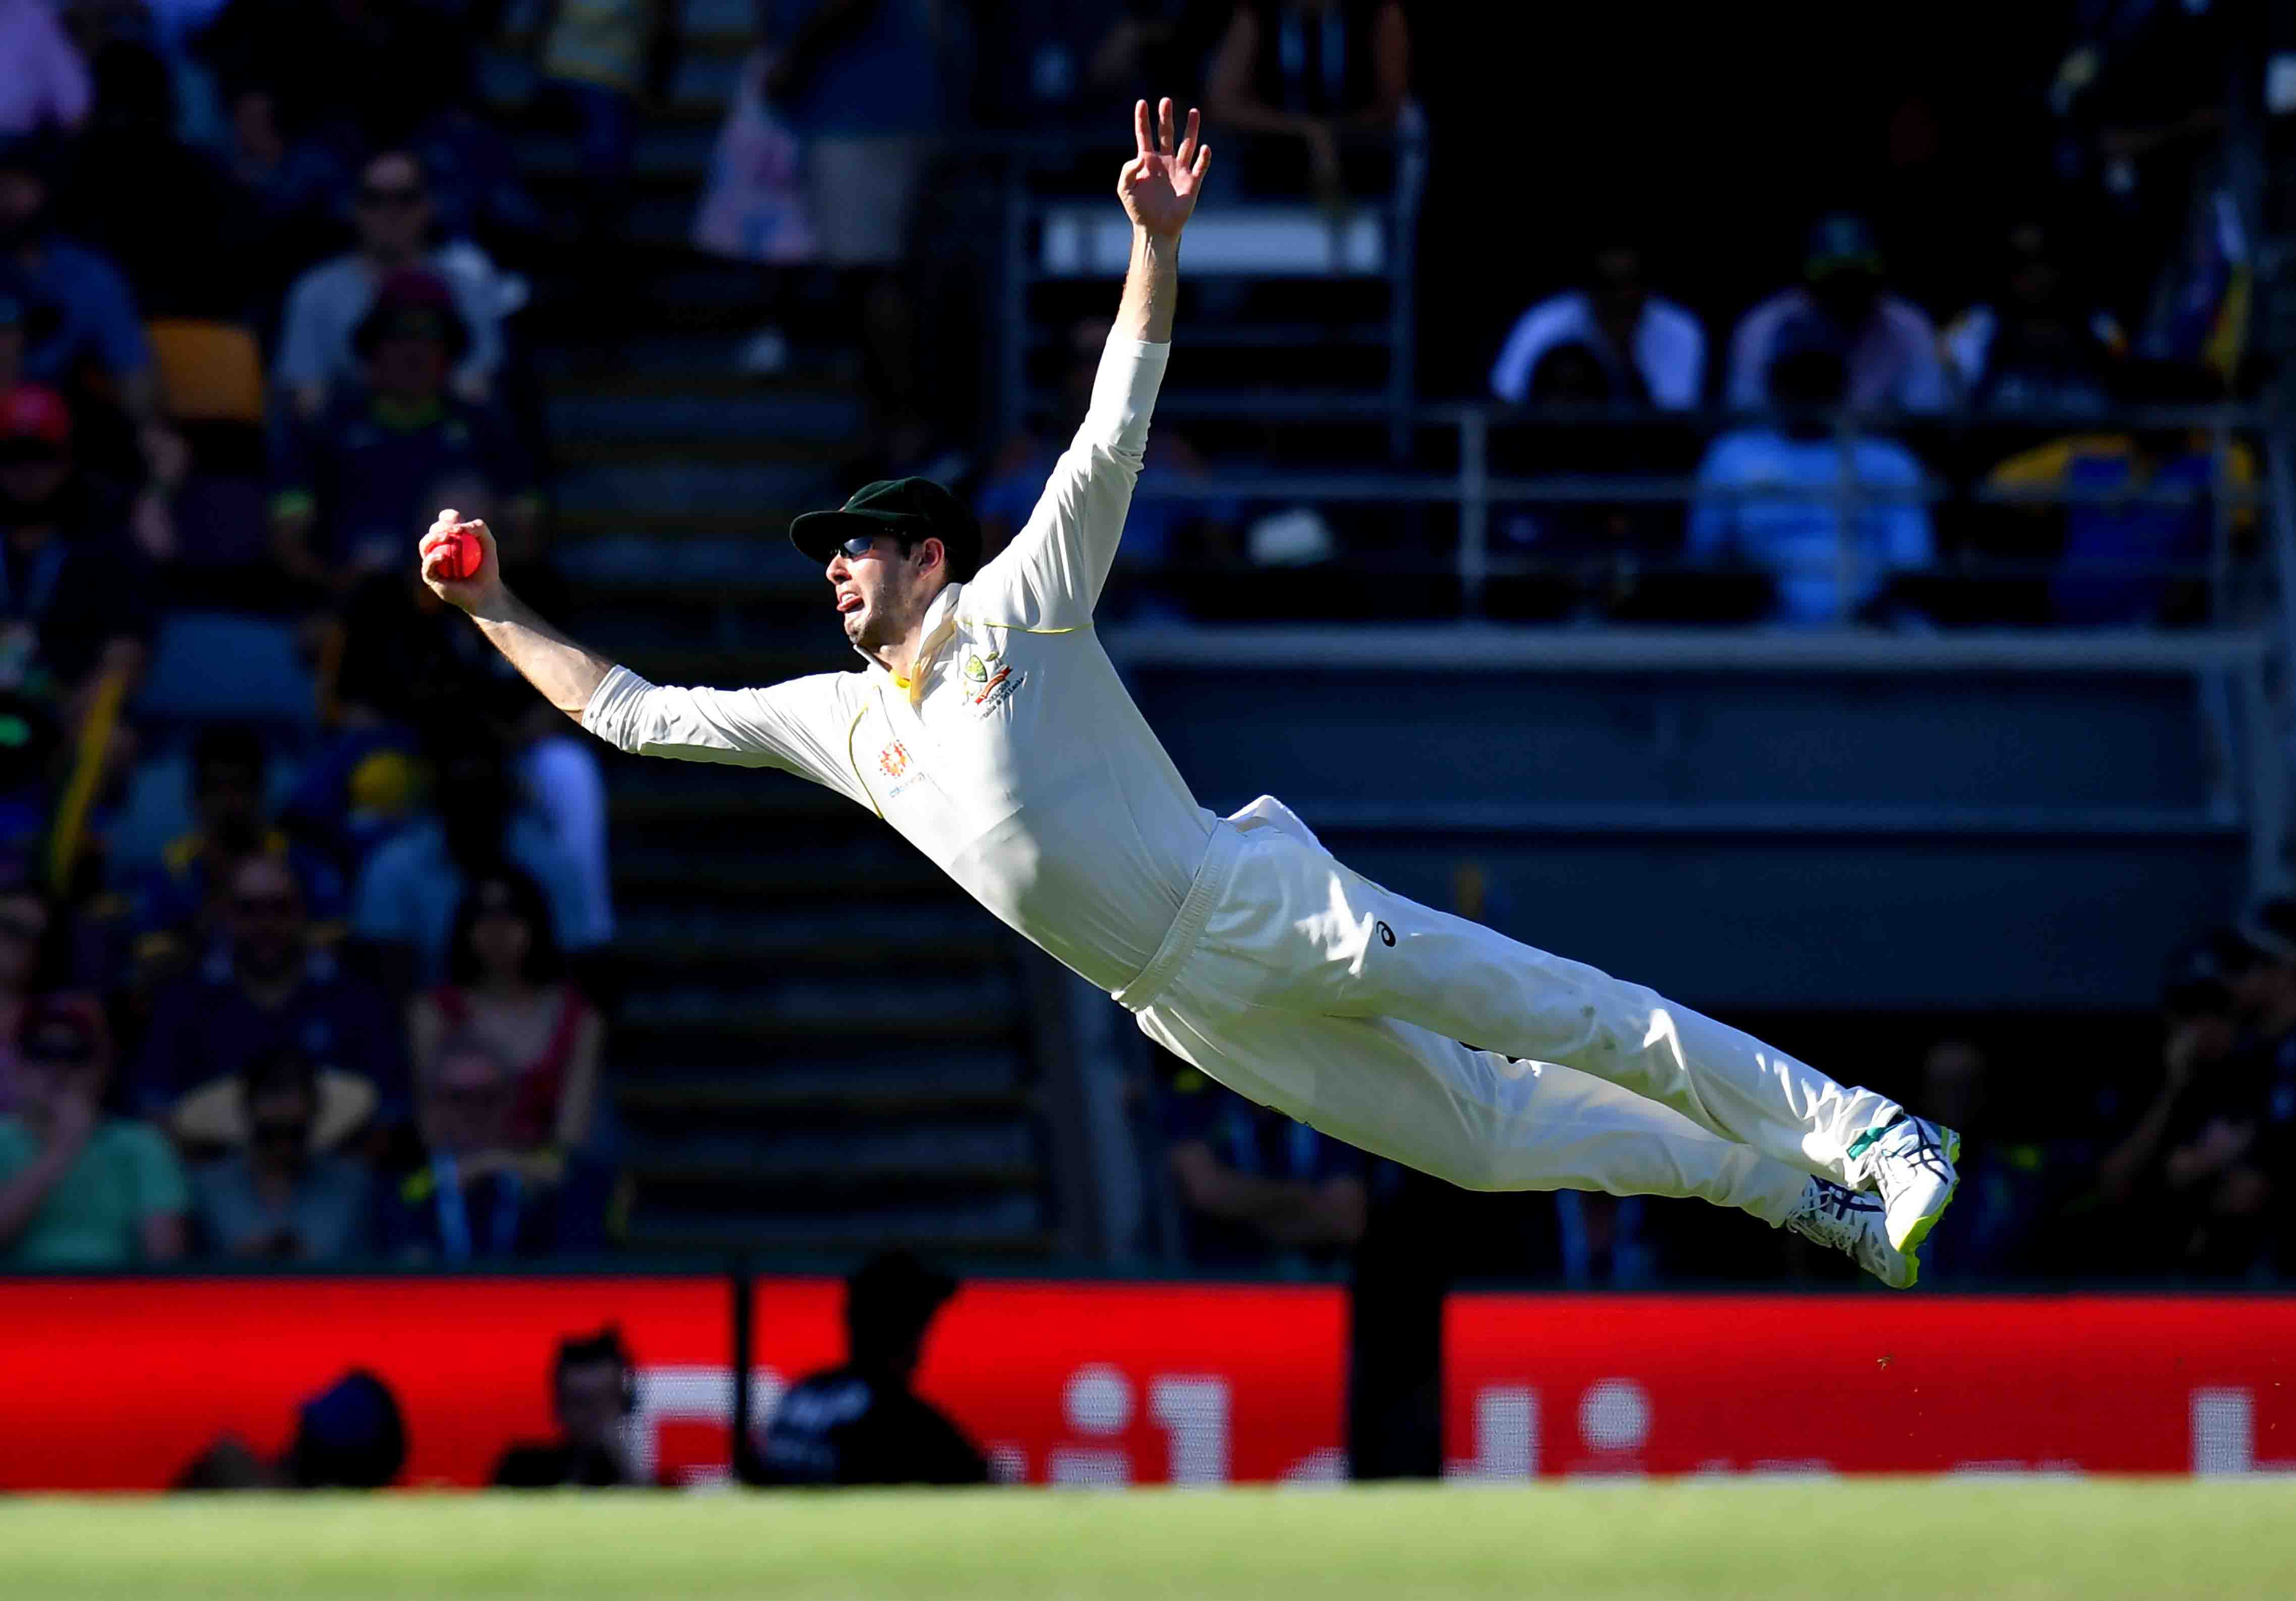 Kurtis Patterson of Australia is seen diving to take a catch to dismiss Dilruwan Perera of Sri Lanka off the bowling of Pat Cummins on Day 3 of the first Test between Australia and Sri Lanka at The Gabba.